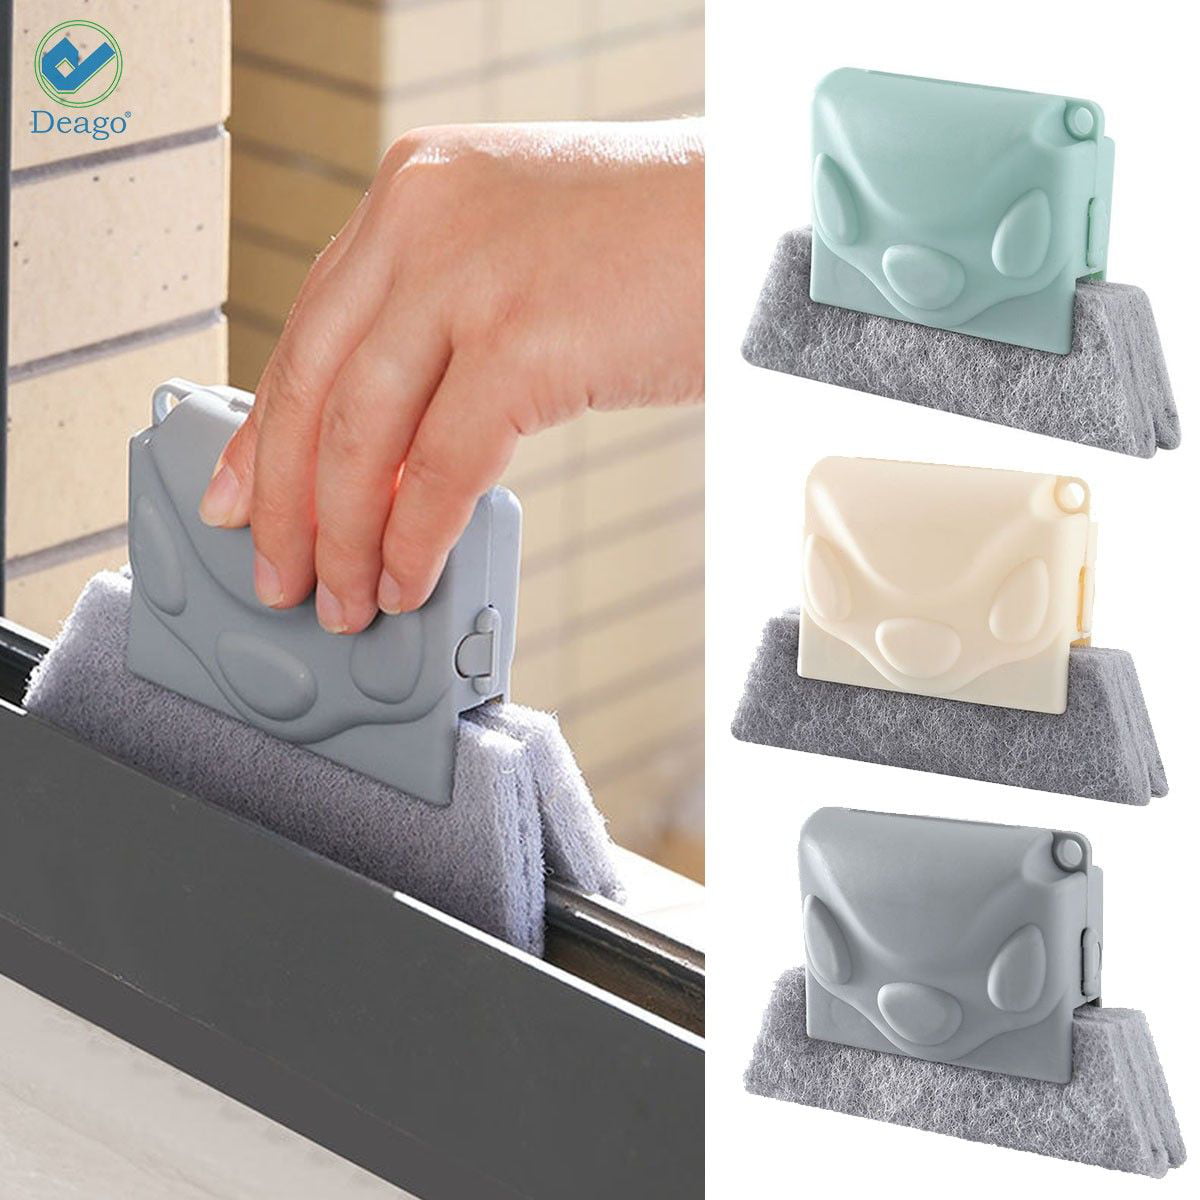 Quickly Clean All Corners Gaps for Door Window Slides Hand-held Crevice Cleaner Tools with Fixed Brush Head Design Scouring Pad Material Green Magic Window Groove Cleaning Brush